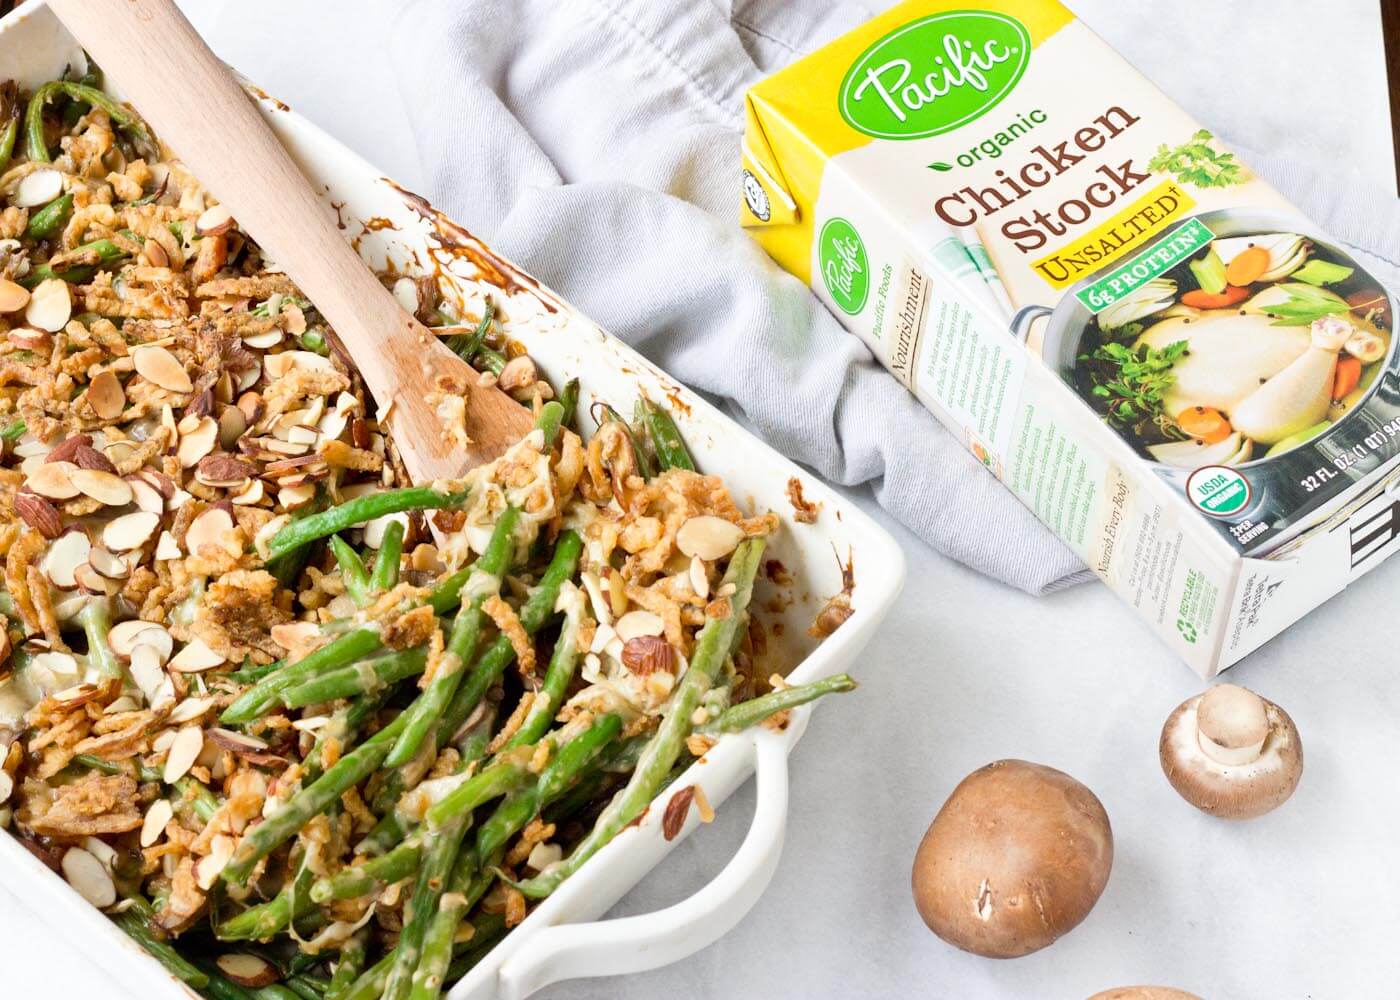 Because we all need Green Bean Casserole in our lives. This is recipe is easy and made with homemade cream of mushroom soup + au gratin topping! Extra crunchies, please!